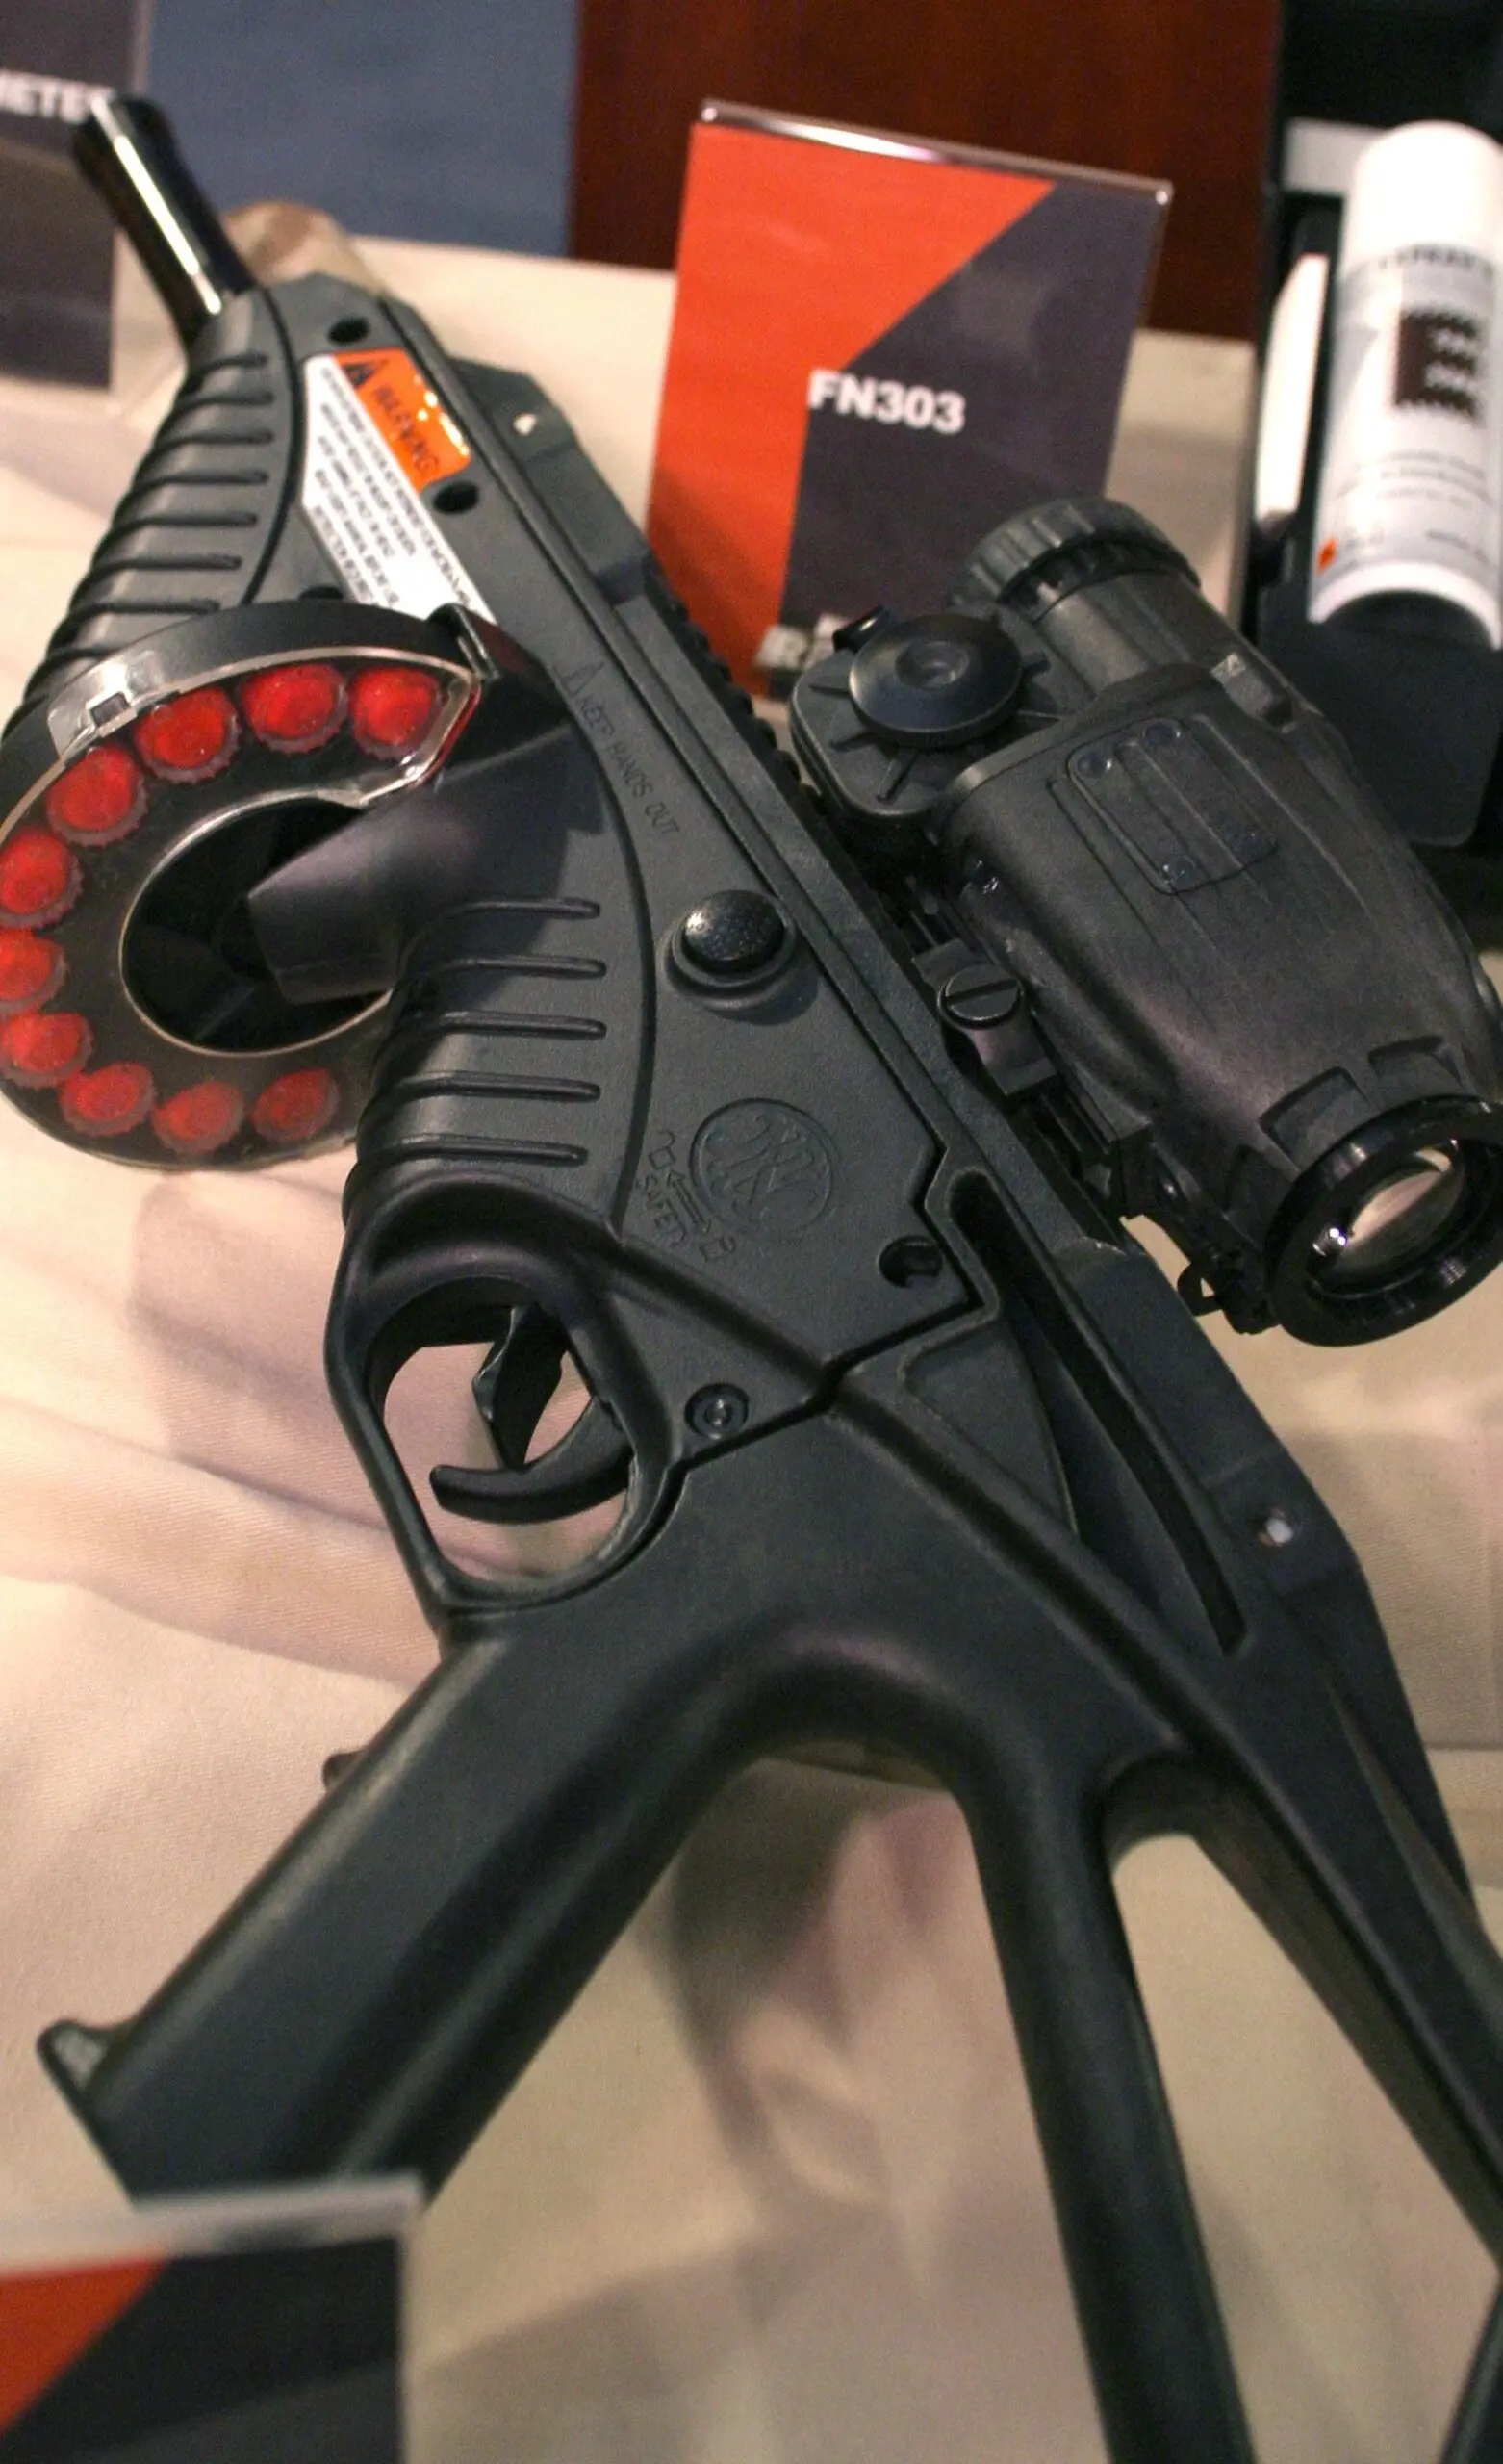 An FN303 on display during a press conference showing off weapons for the war on terror at the Pentagon in Virginia, on Aug. 12, 2005.